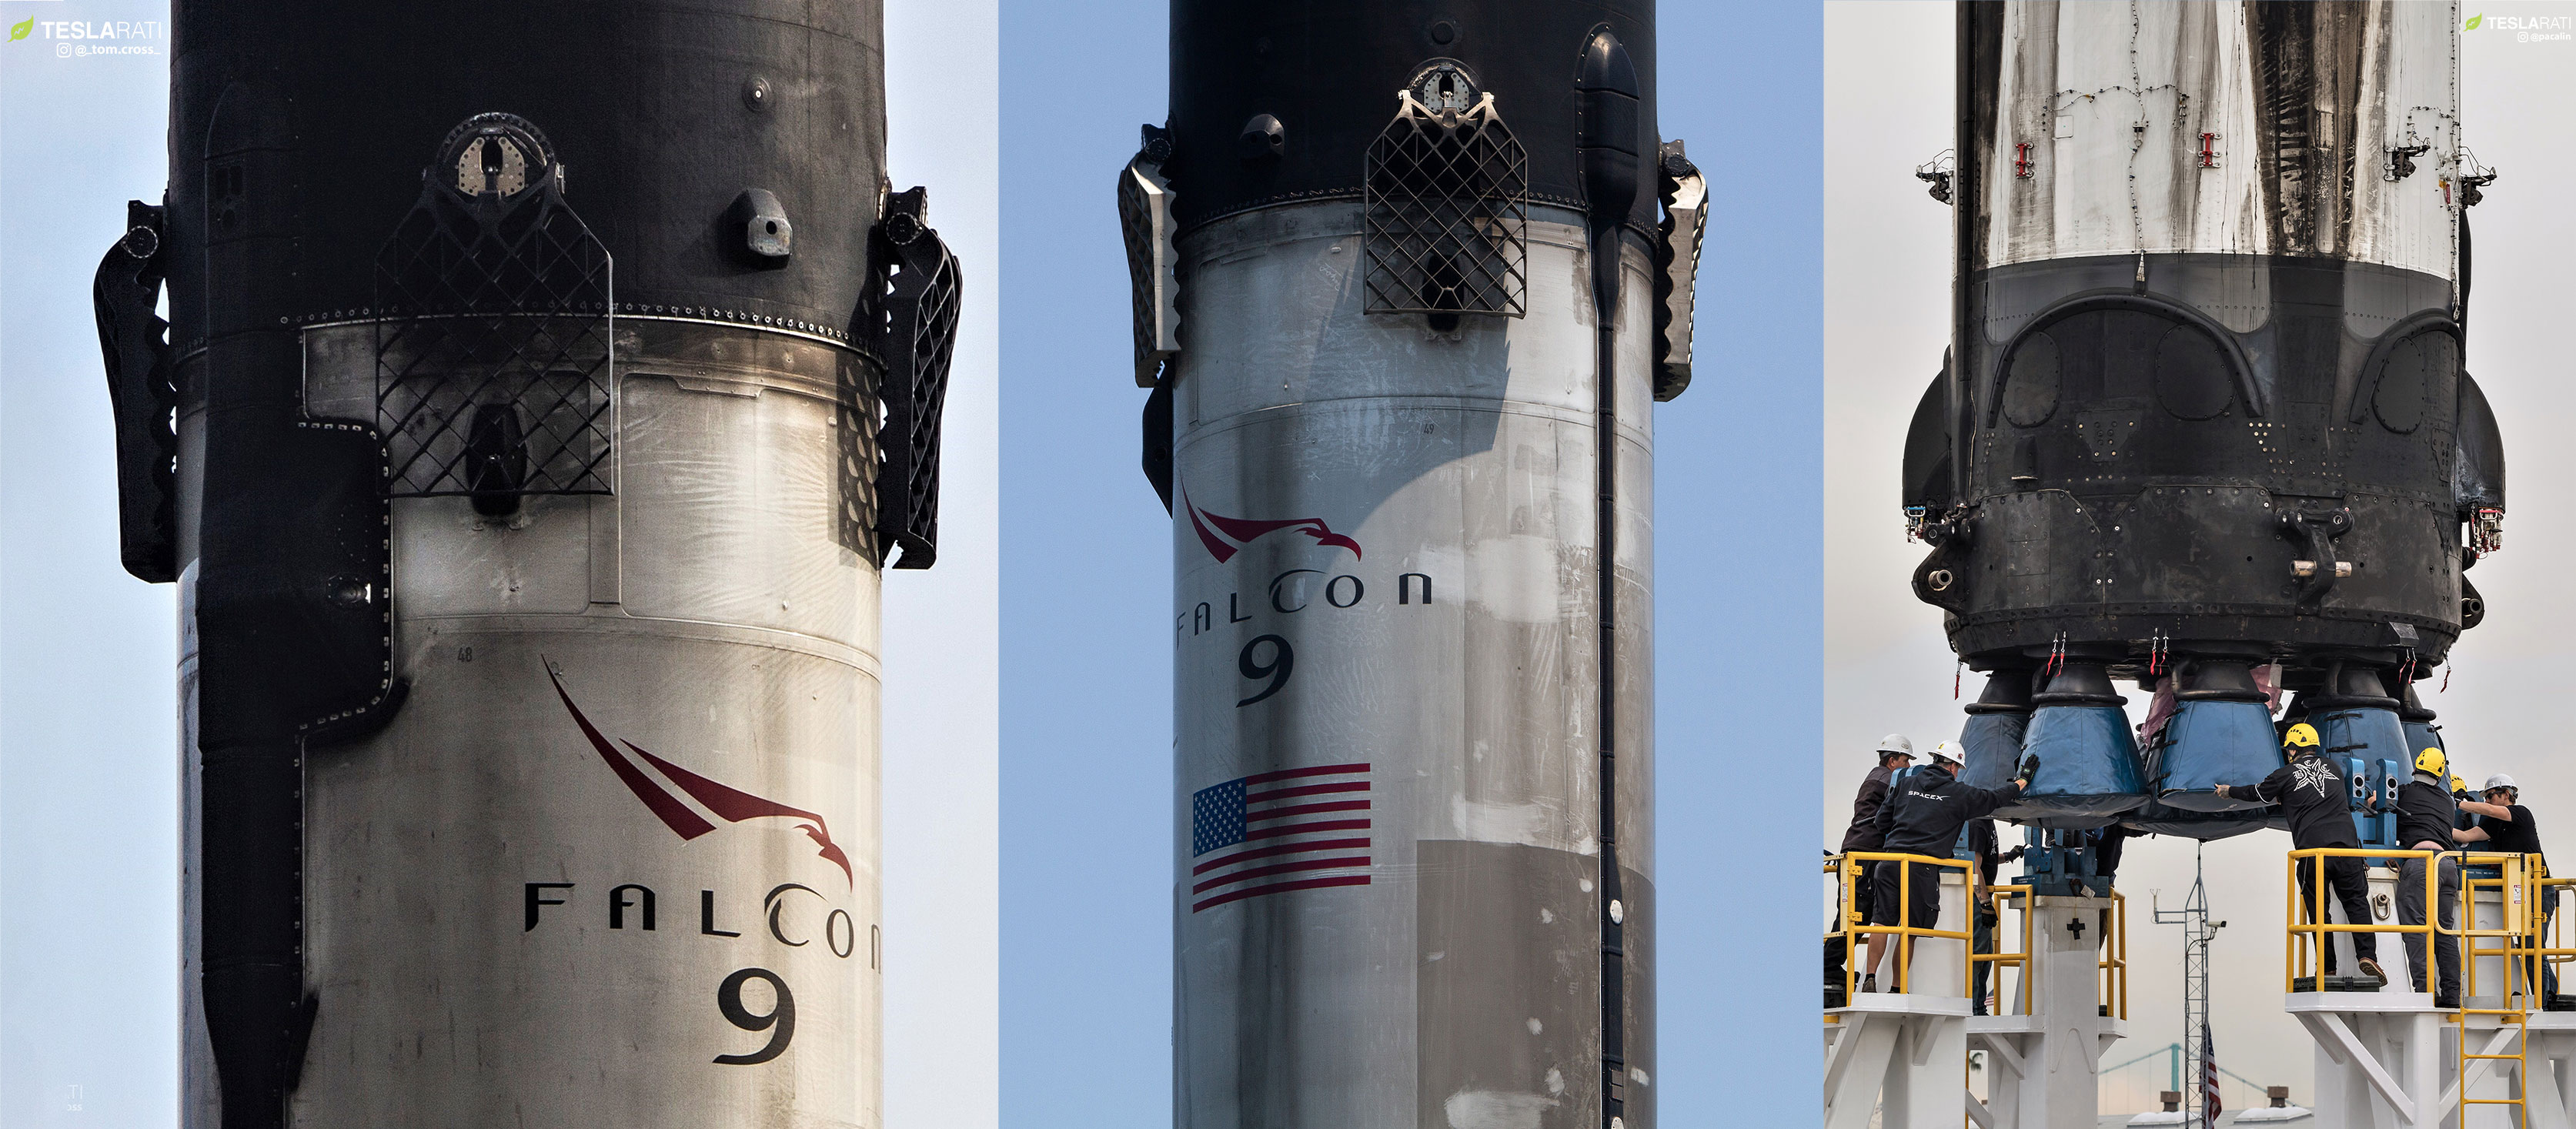 SpaceX's three surviving thrice-flown Block 5 boosters - B1048, B1049, and B1046 - are pictured here in various stages of recovery. (Teslarati, Pauline Acalin)